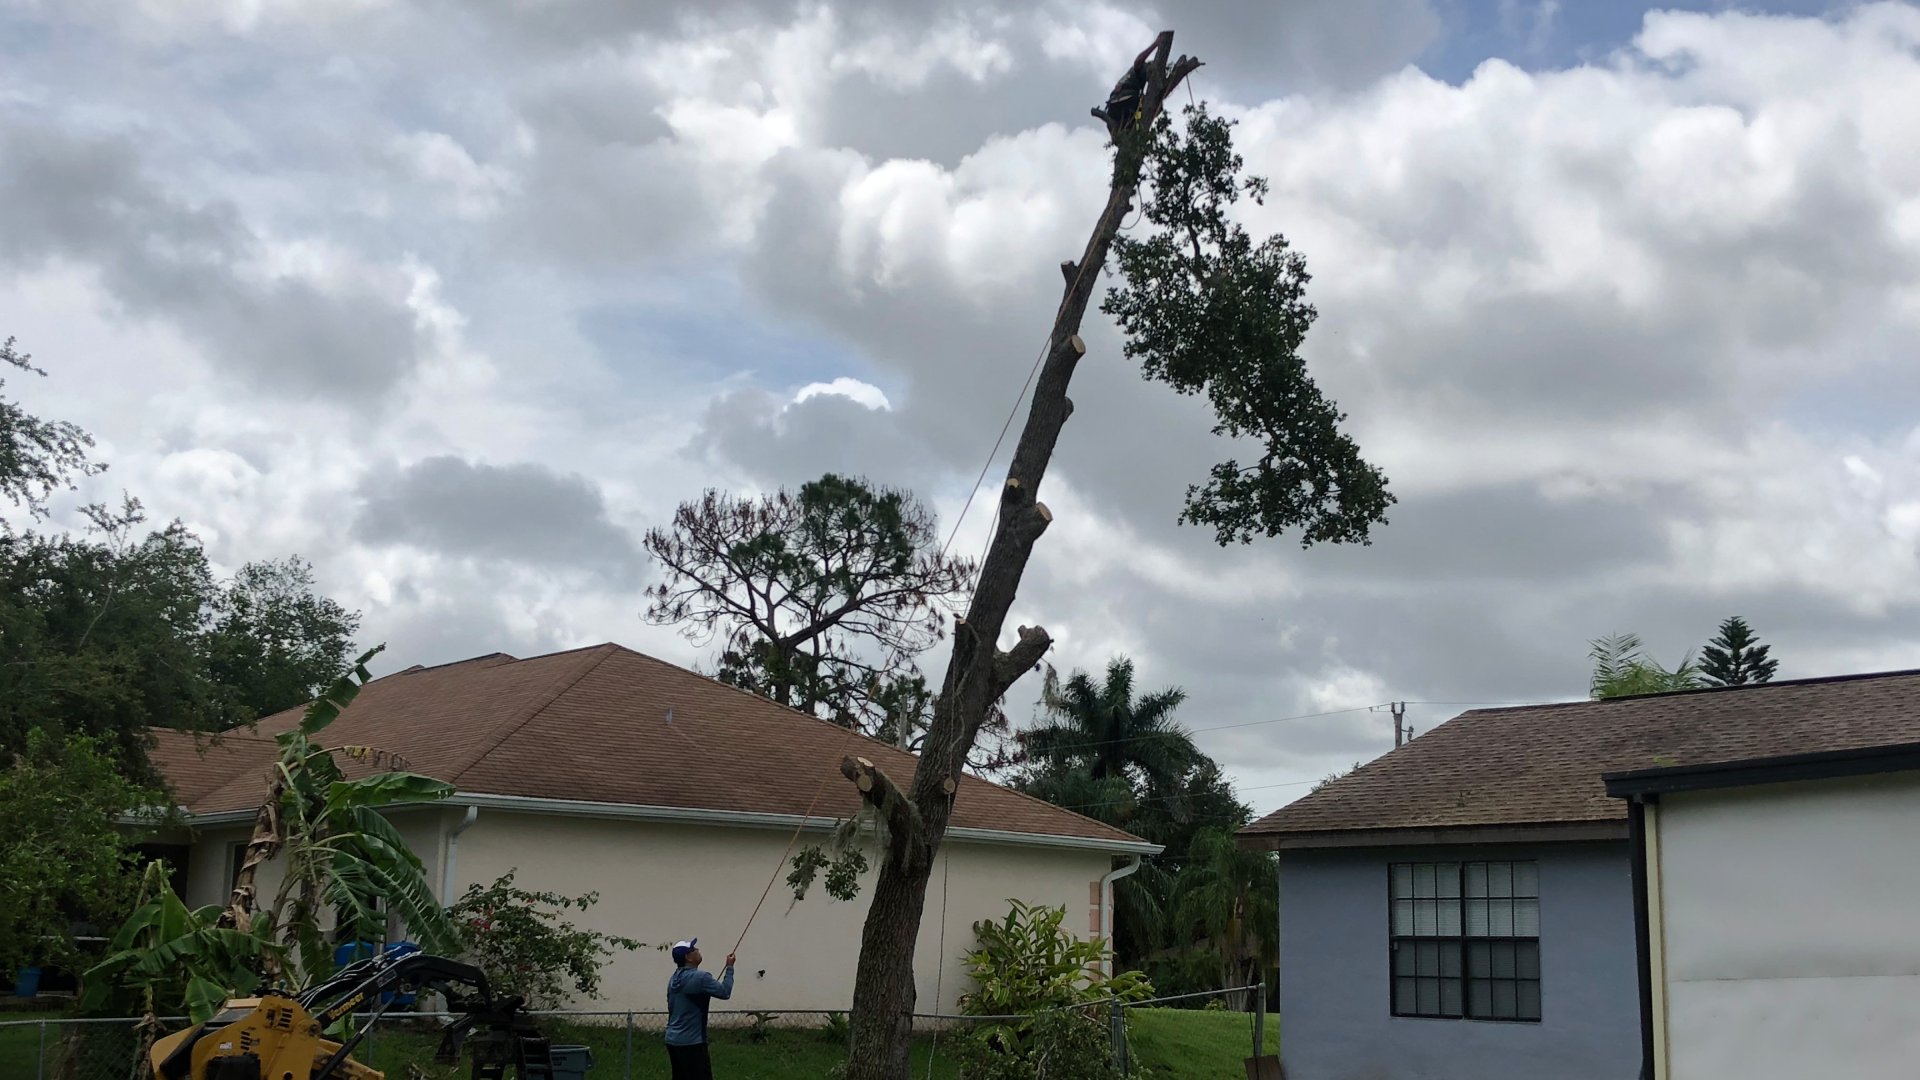 Two professionals trimming tree to avoid house damage in Suncoast Estates, FL.